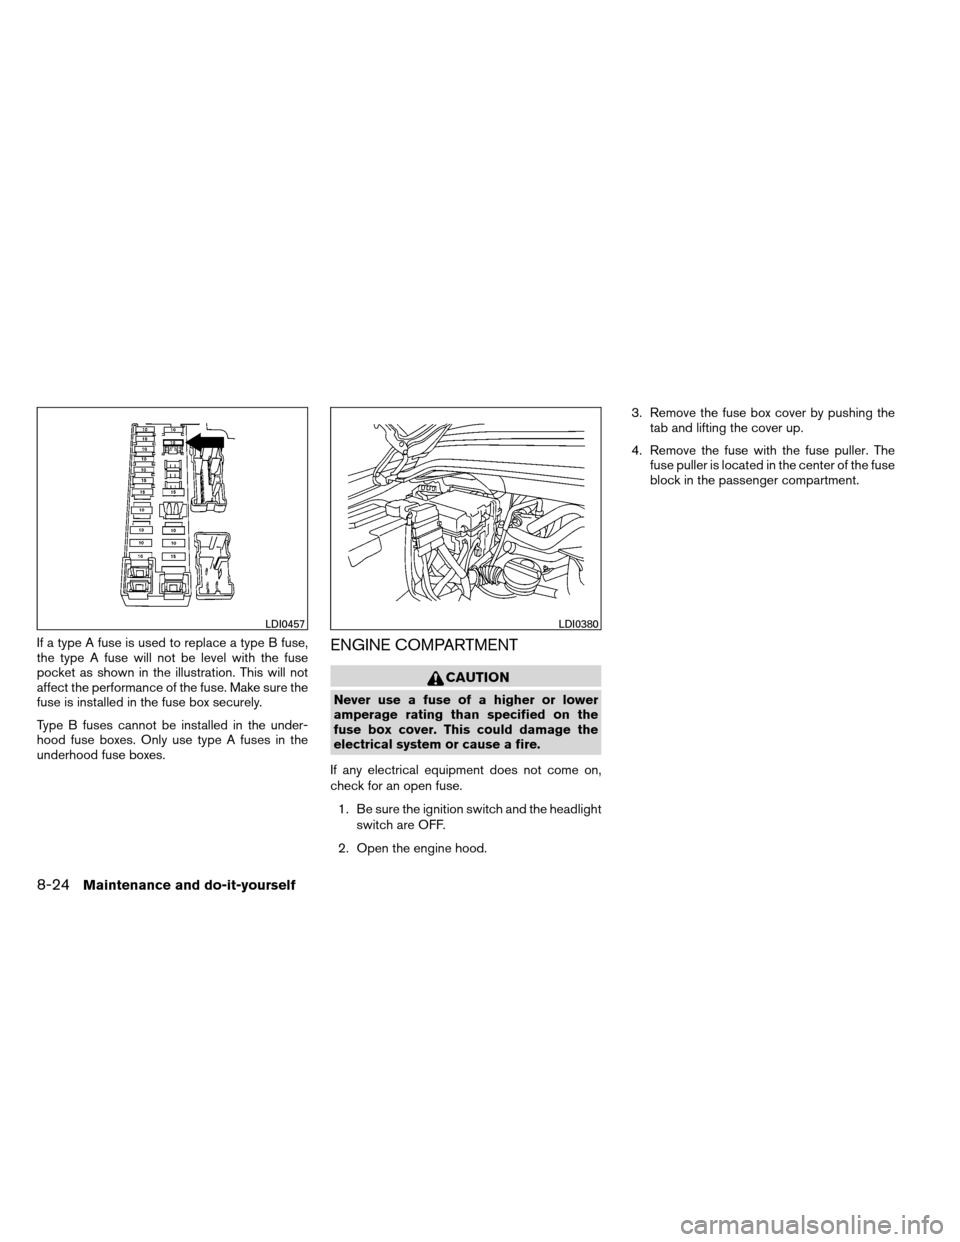 NISSAN ARMADA 2012 1.G Owners Manual If a type A fuse is used to replace a type B fuse,
the type A fuse will not be level with the fuse
pocket as shown in the illustration. This will not
affect the performance of the fuse. Make sure the
